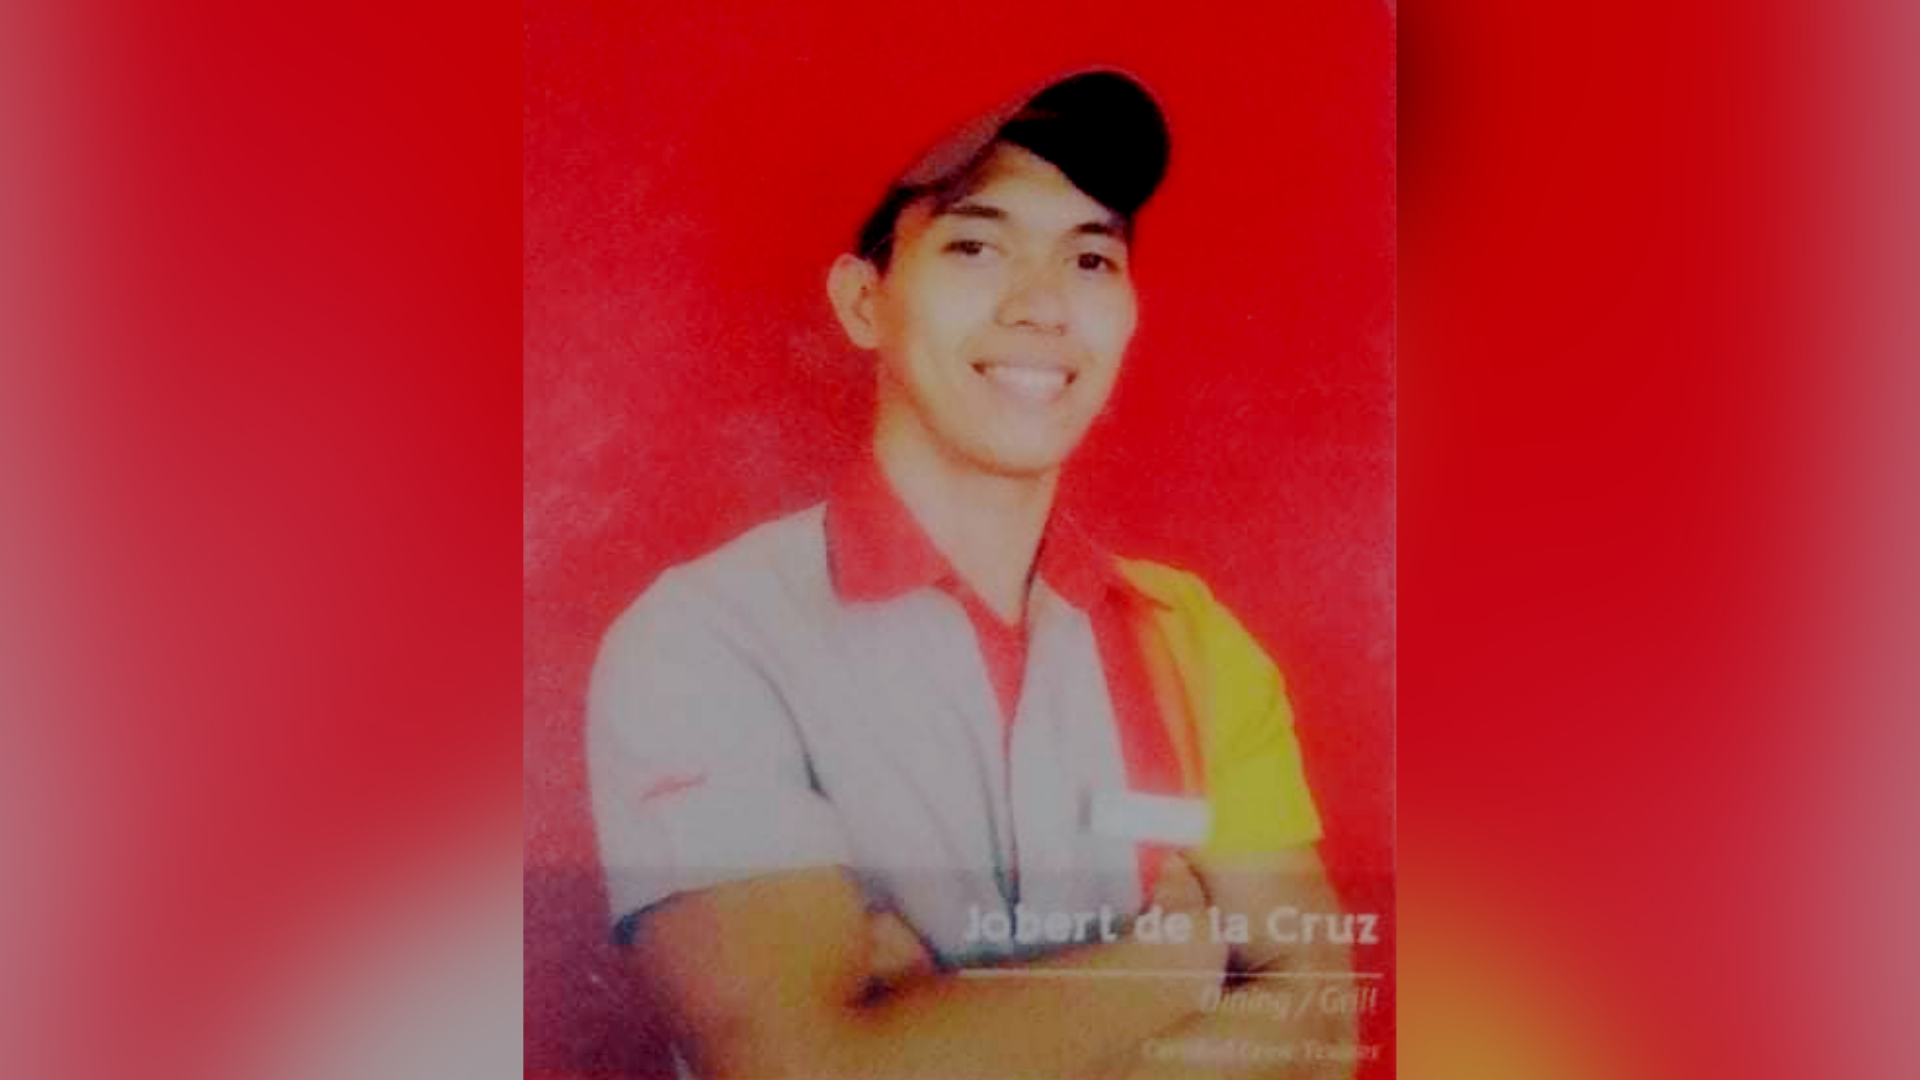 He Used to Work as a Fastfood Crew Member Before Becoming a Civil Engineering Topnotcher